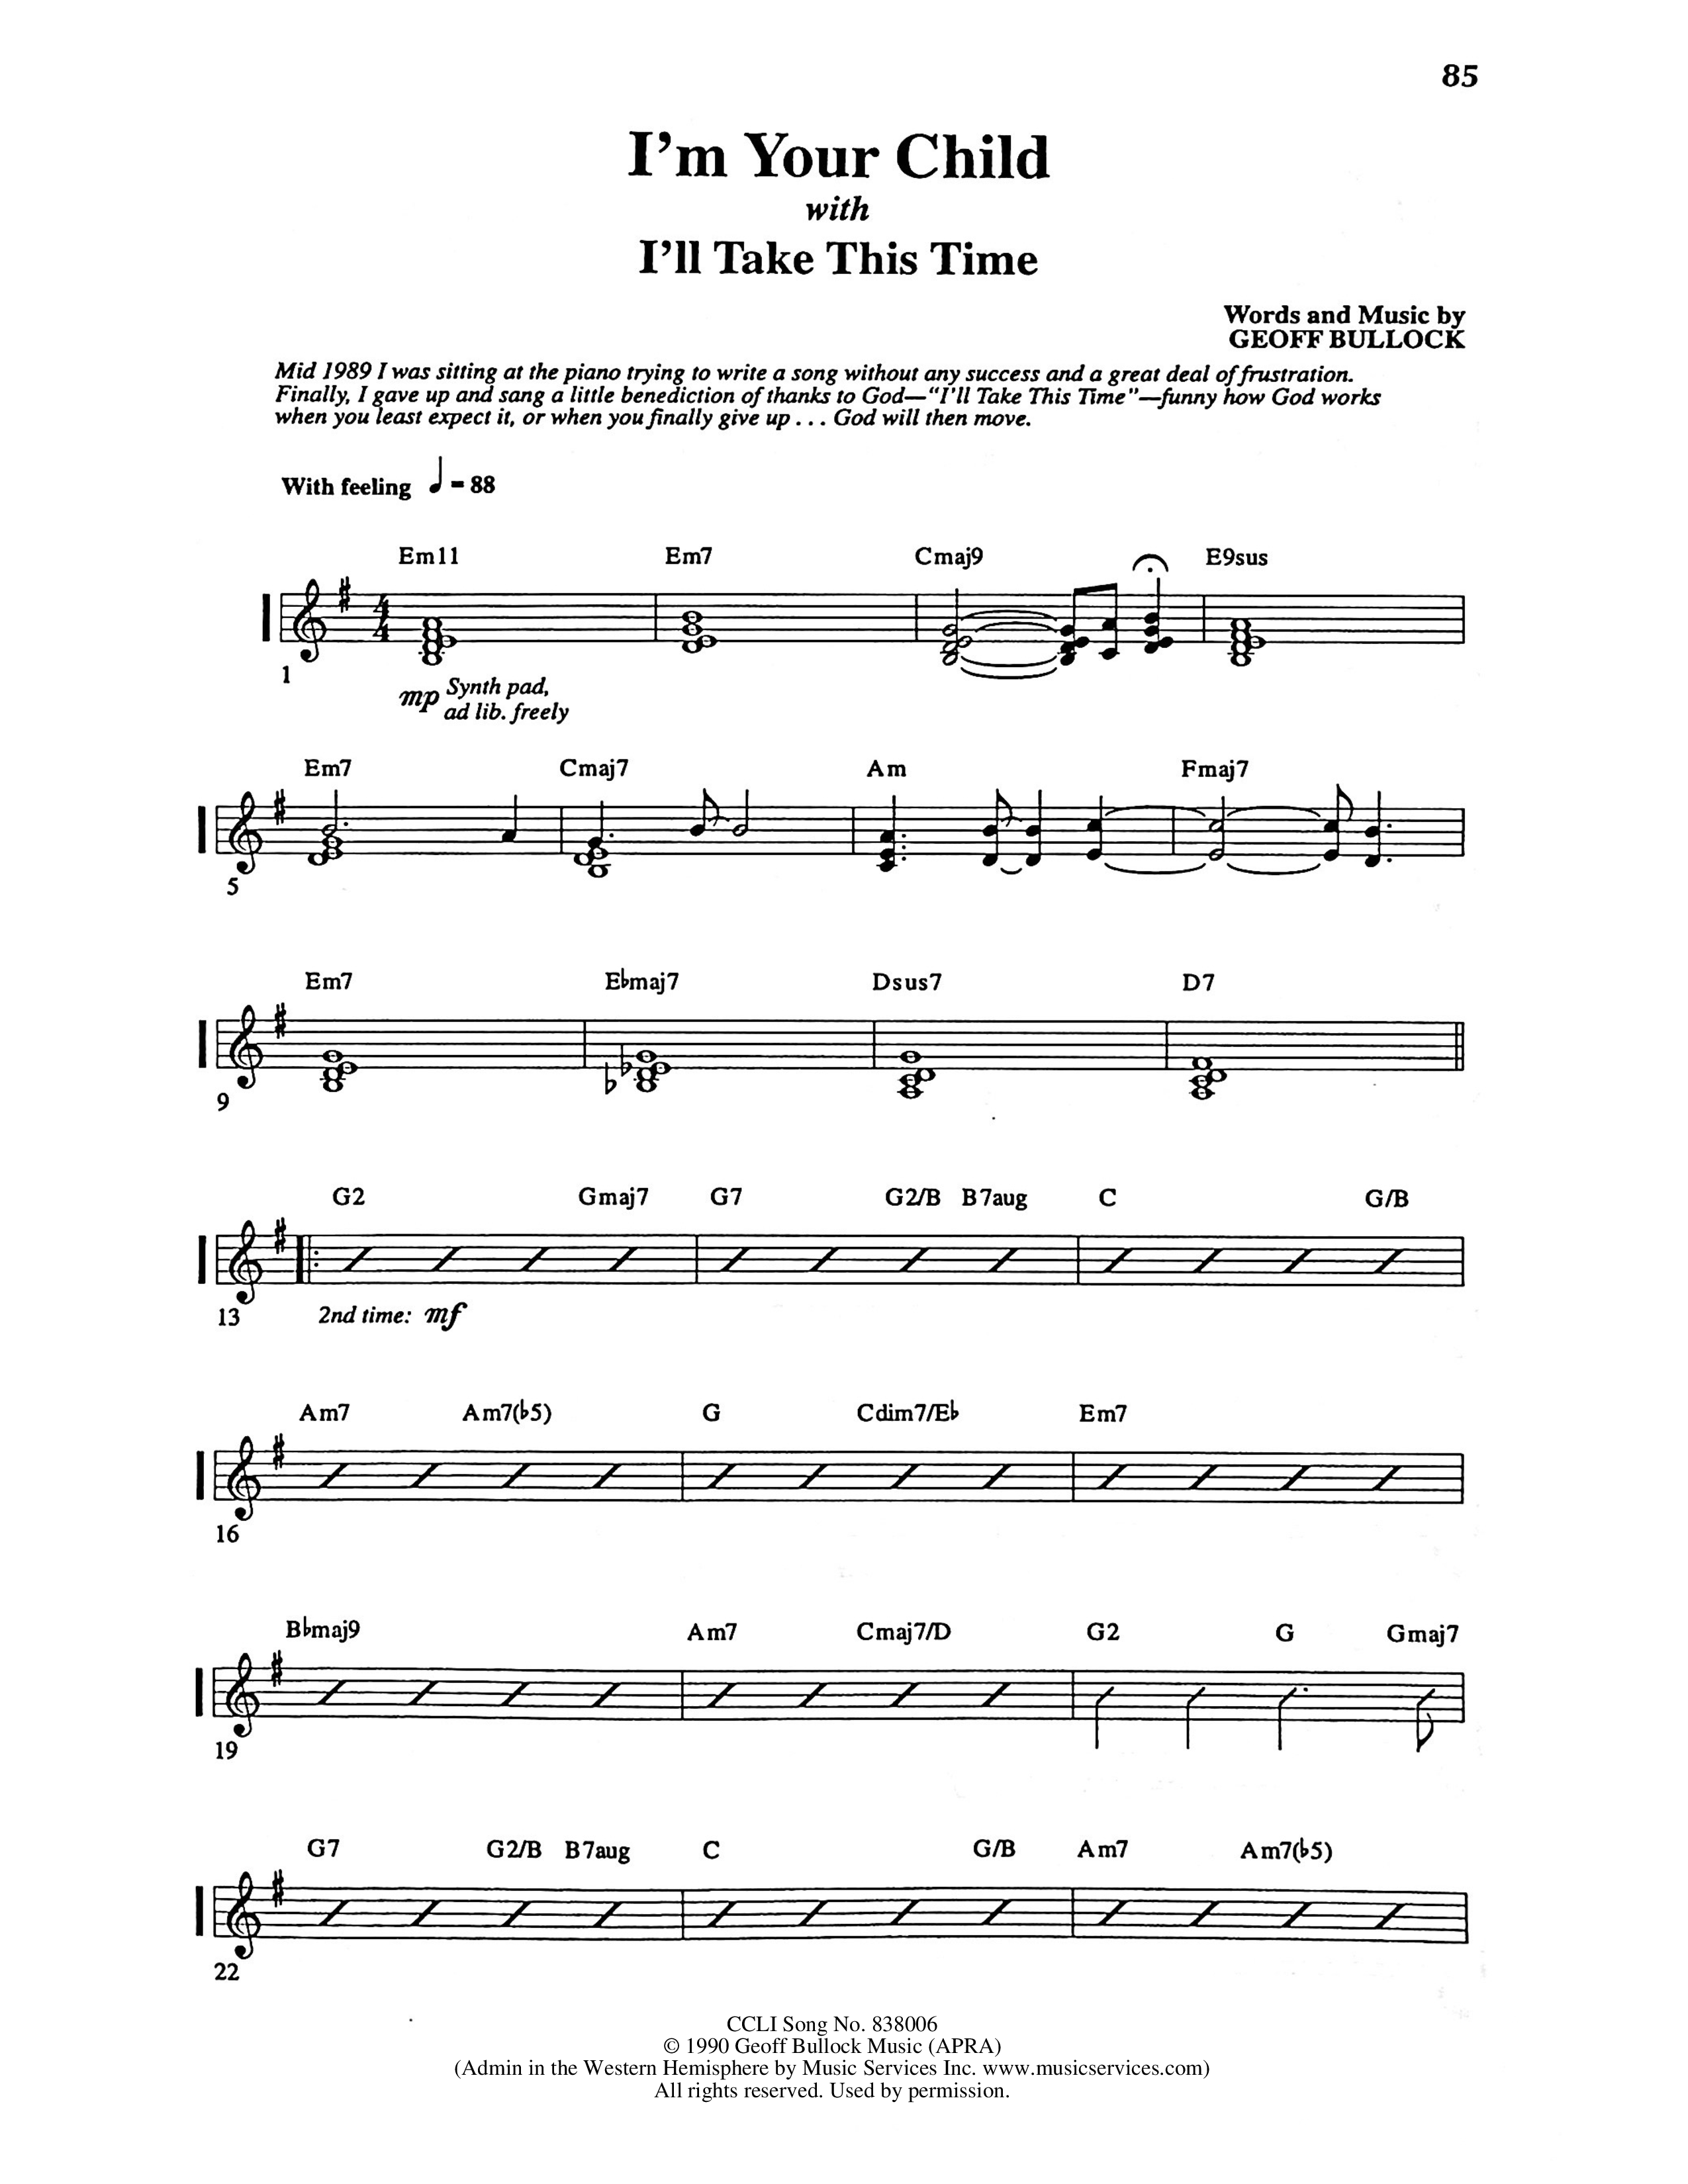 I'm Your Child (with I'll Take This Time) Rhythm Chart (Geoff Bullock)